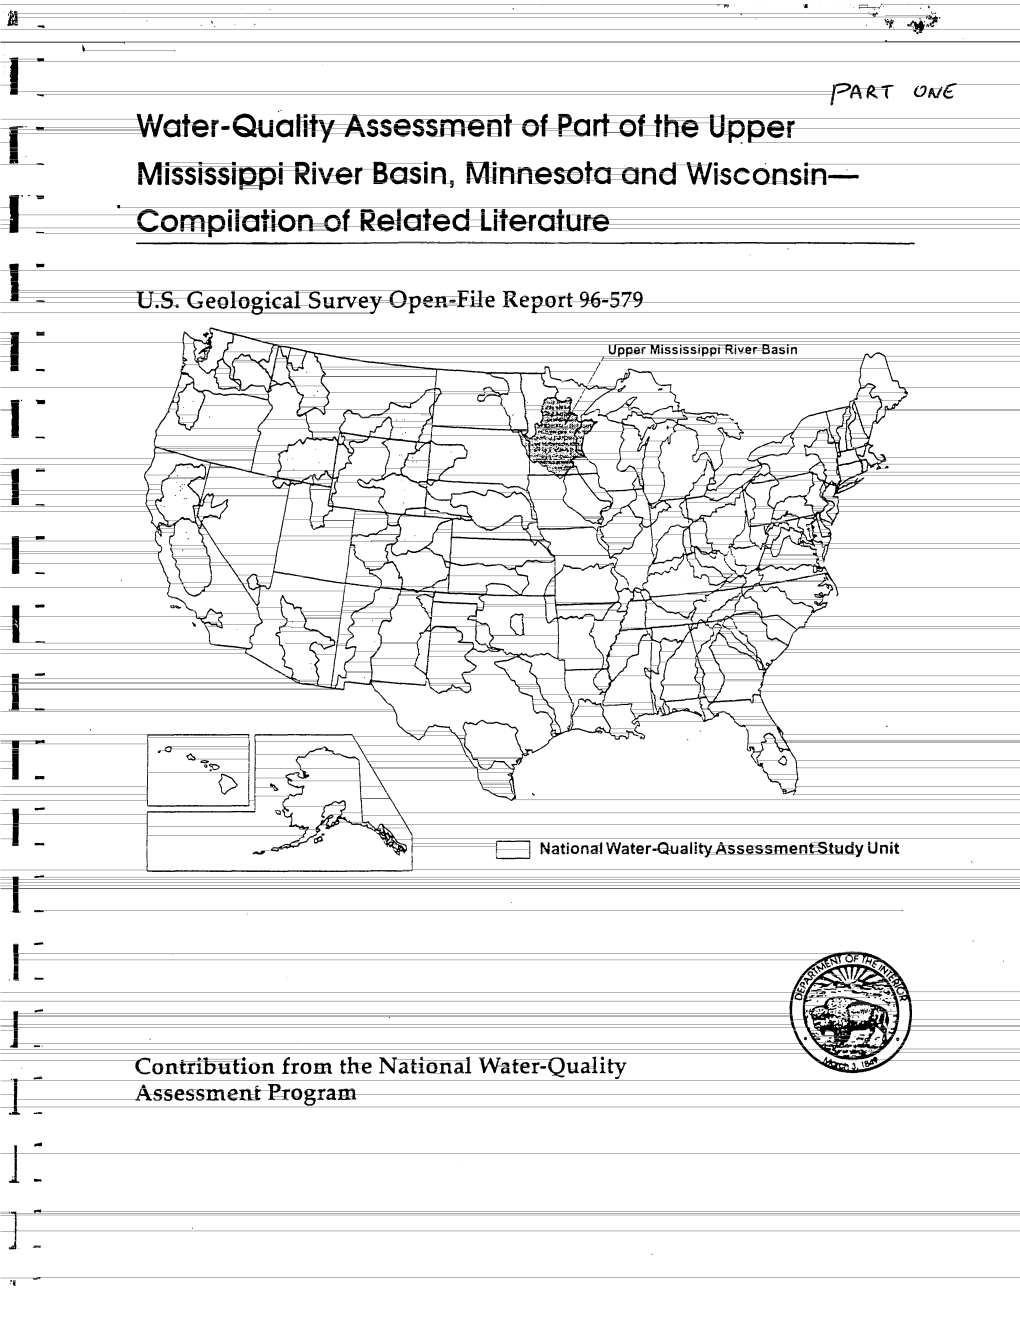 Water-Quality Assessment of Part of the Upper Mississippi River Basin, Minnesota and Wisconsin- Compilation of Related Literature______